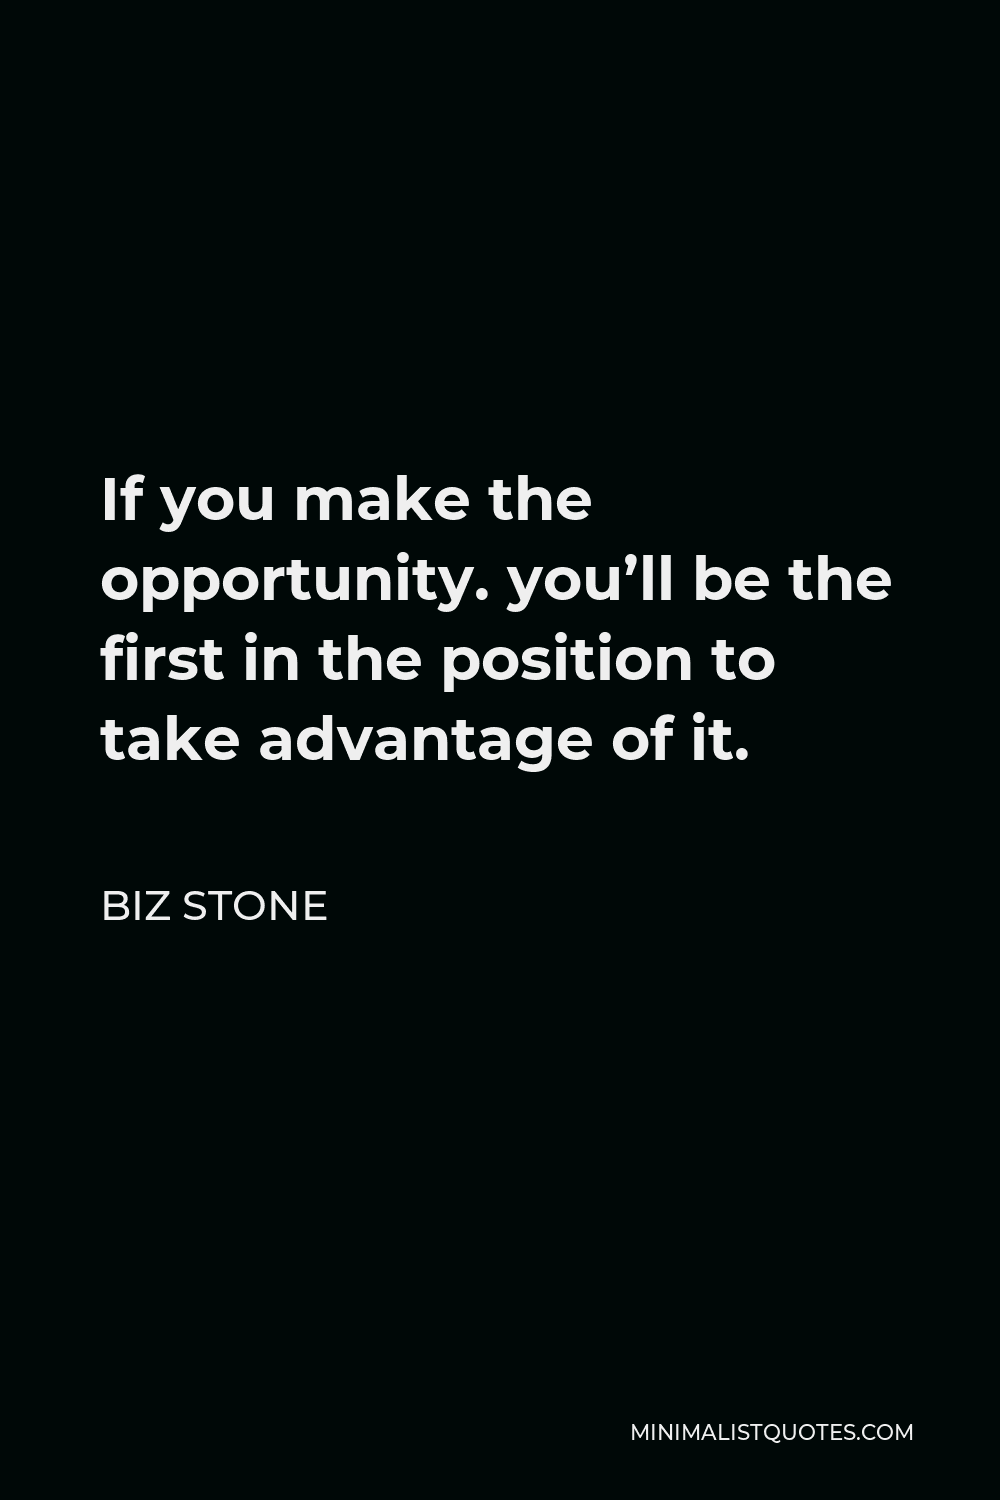 Biz Stone Quote - If you make the opportunity. you’ll be the first in the position to take advantage of it.